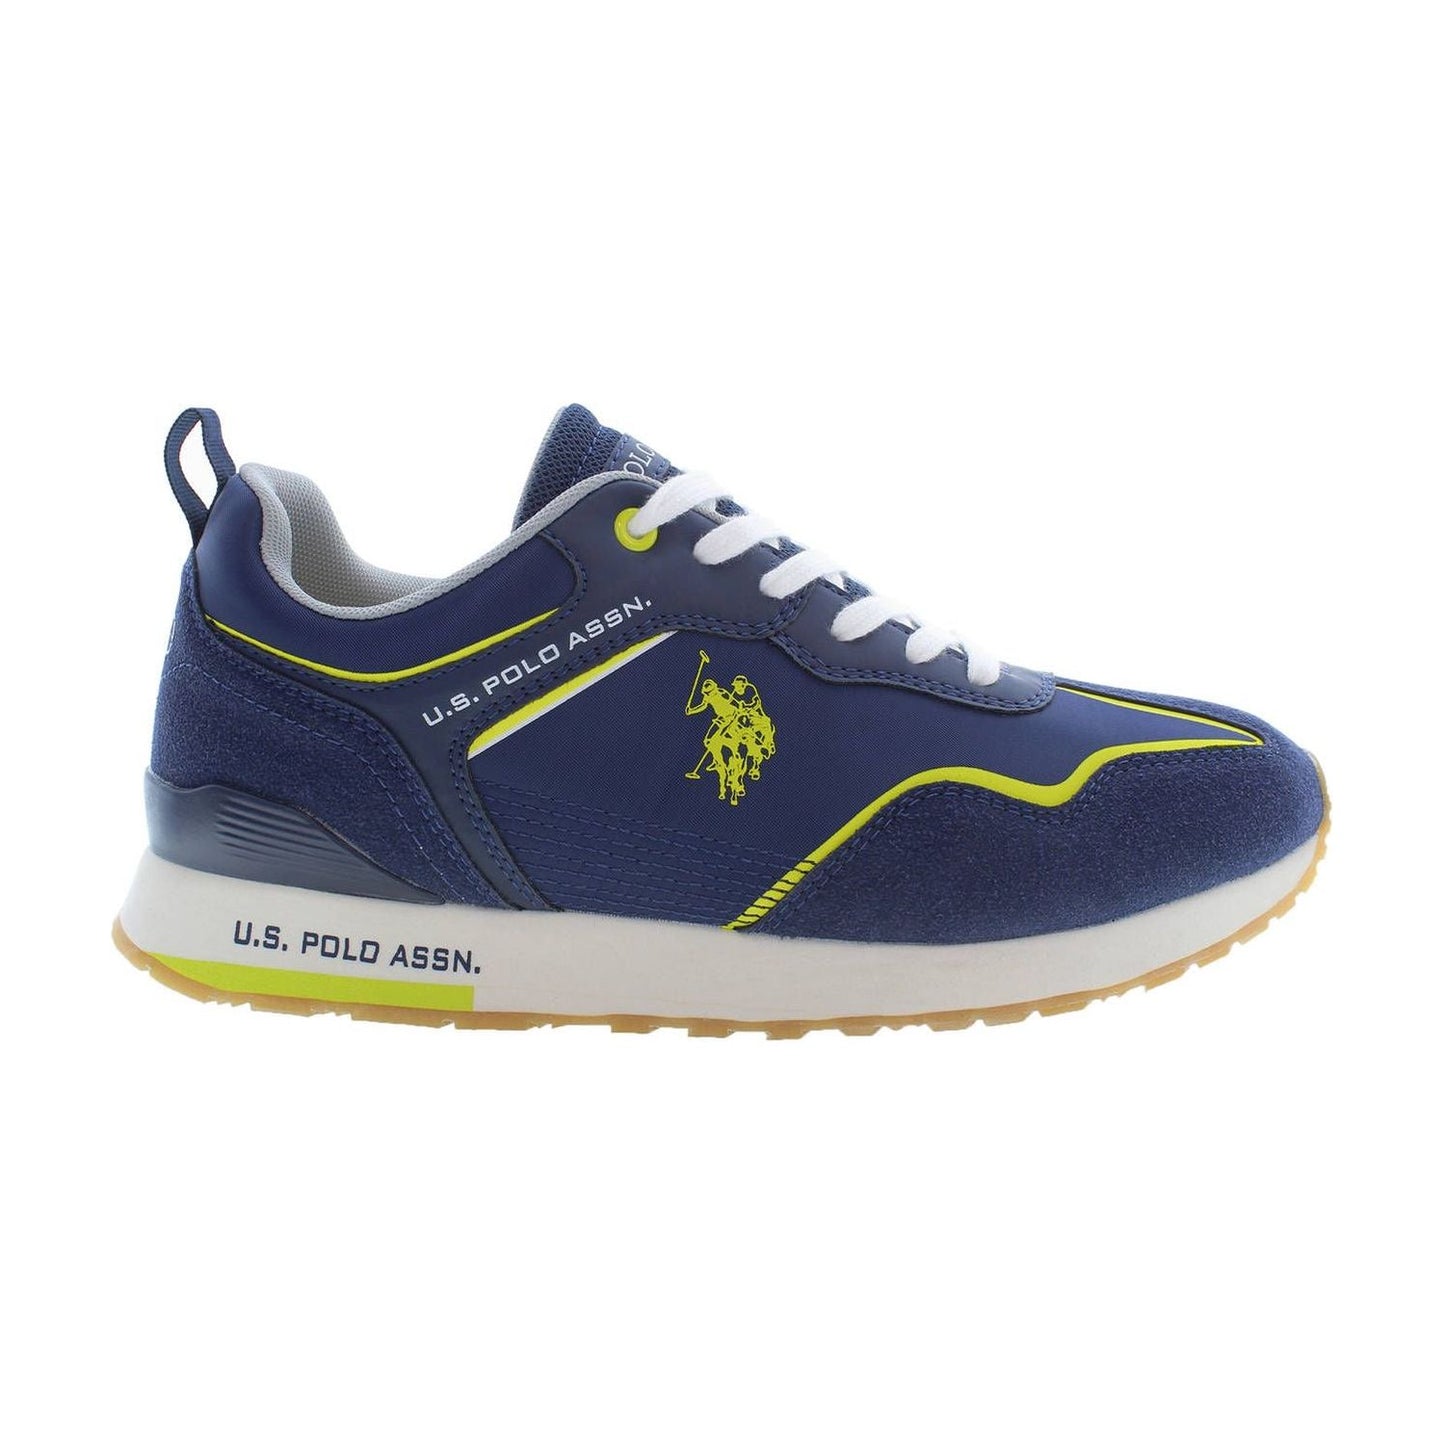 U.S. POLO ASSN. Sporty Elegance Lace-Up Sneakers in Blue sporty-elegance-lace-up-sneakers-in-blue